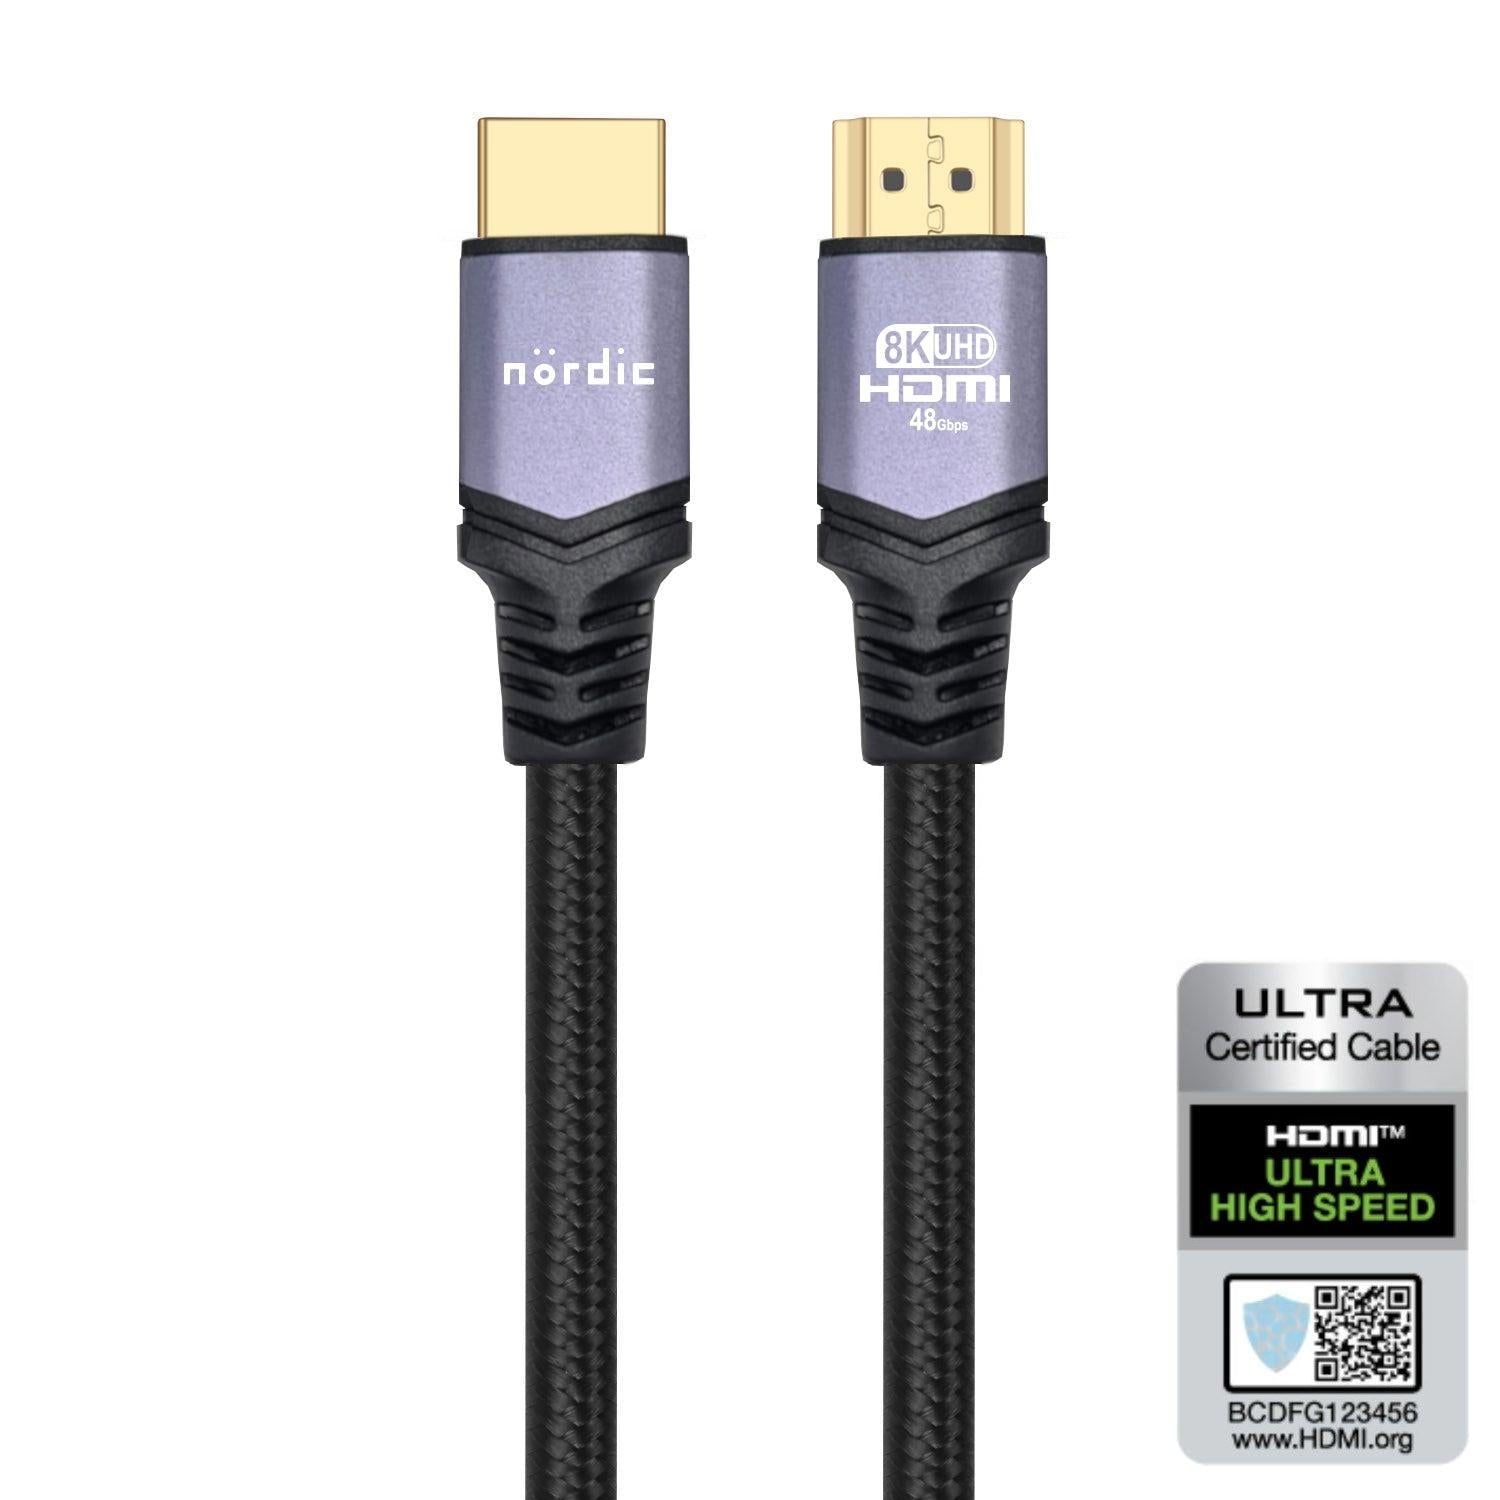 NÖRDIC CERTIFIED CABLES 2m Ultra High Speed HDMI 2.1 8K 60Hz 4K 120Hz 48Gbps Dynamic HDR eARC Game Mode VRR Dolby ATMOS Nylonflettet guldbelagt